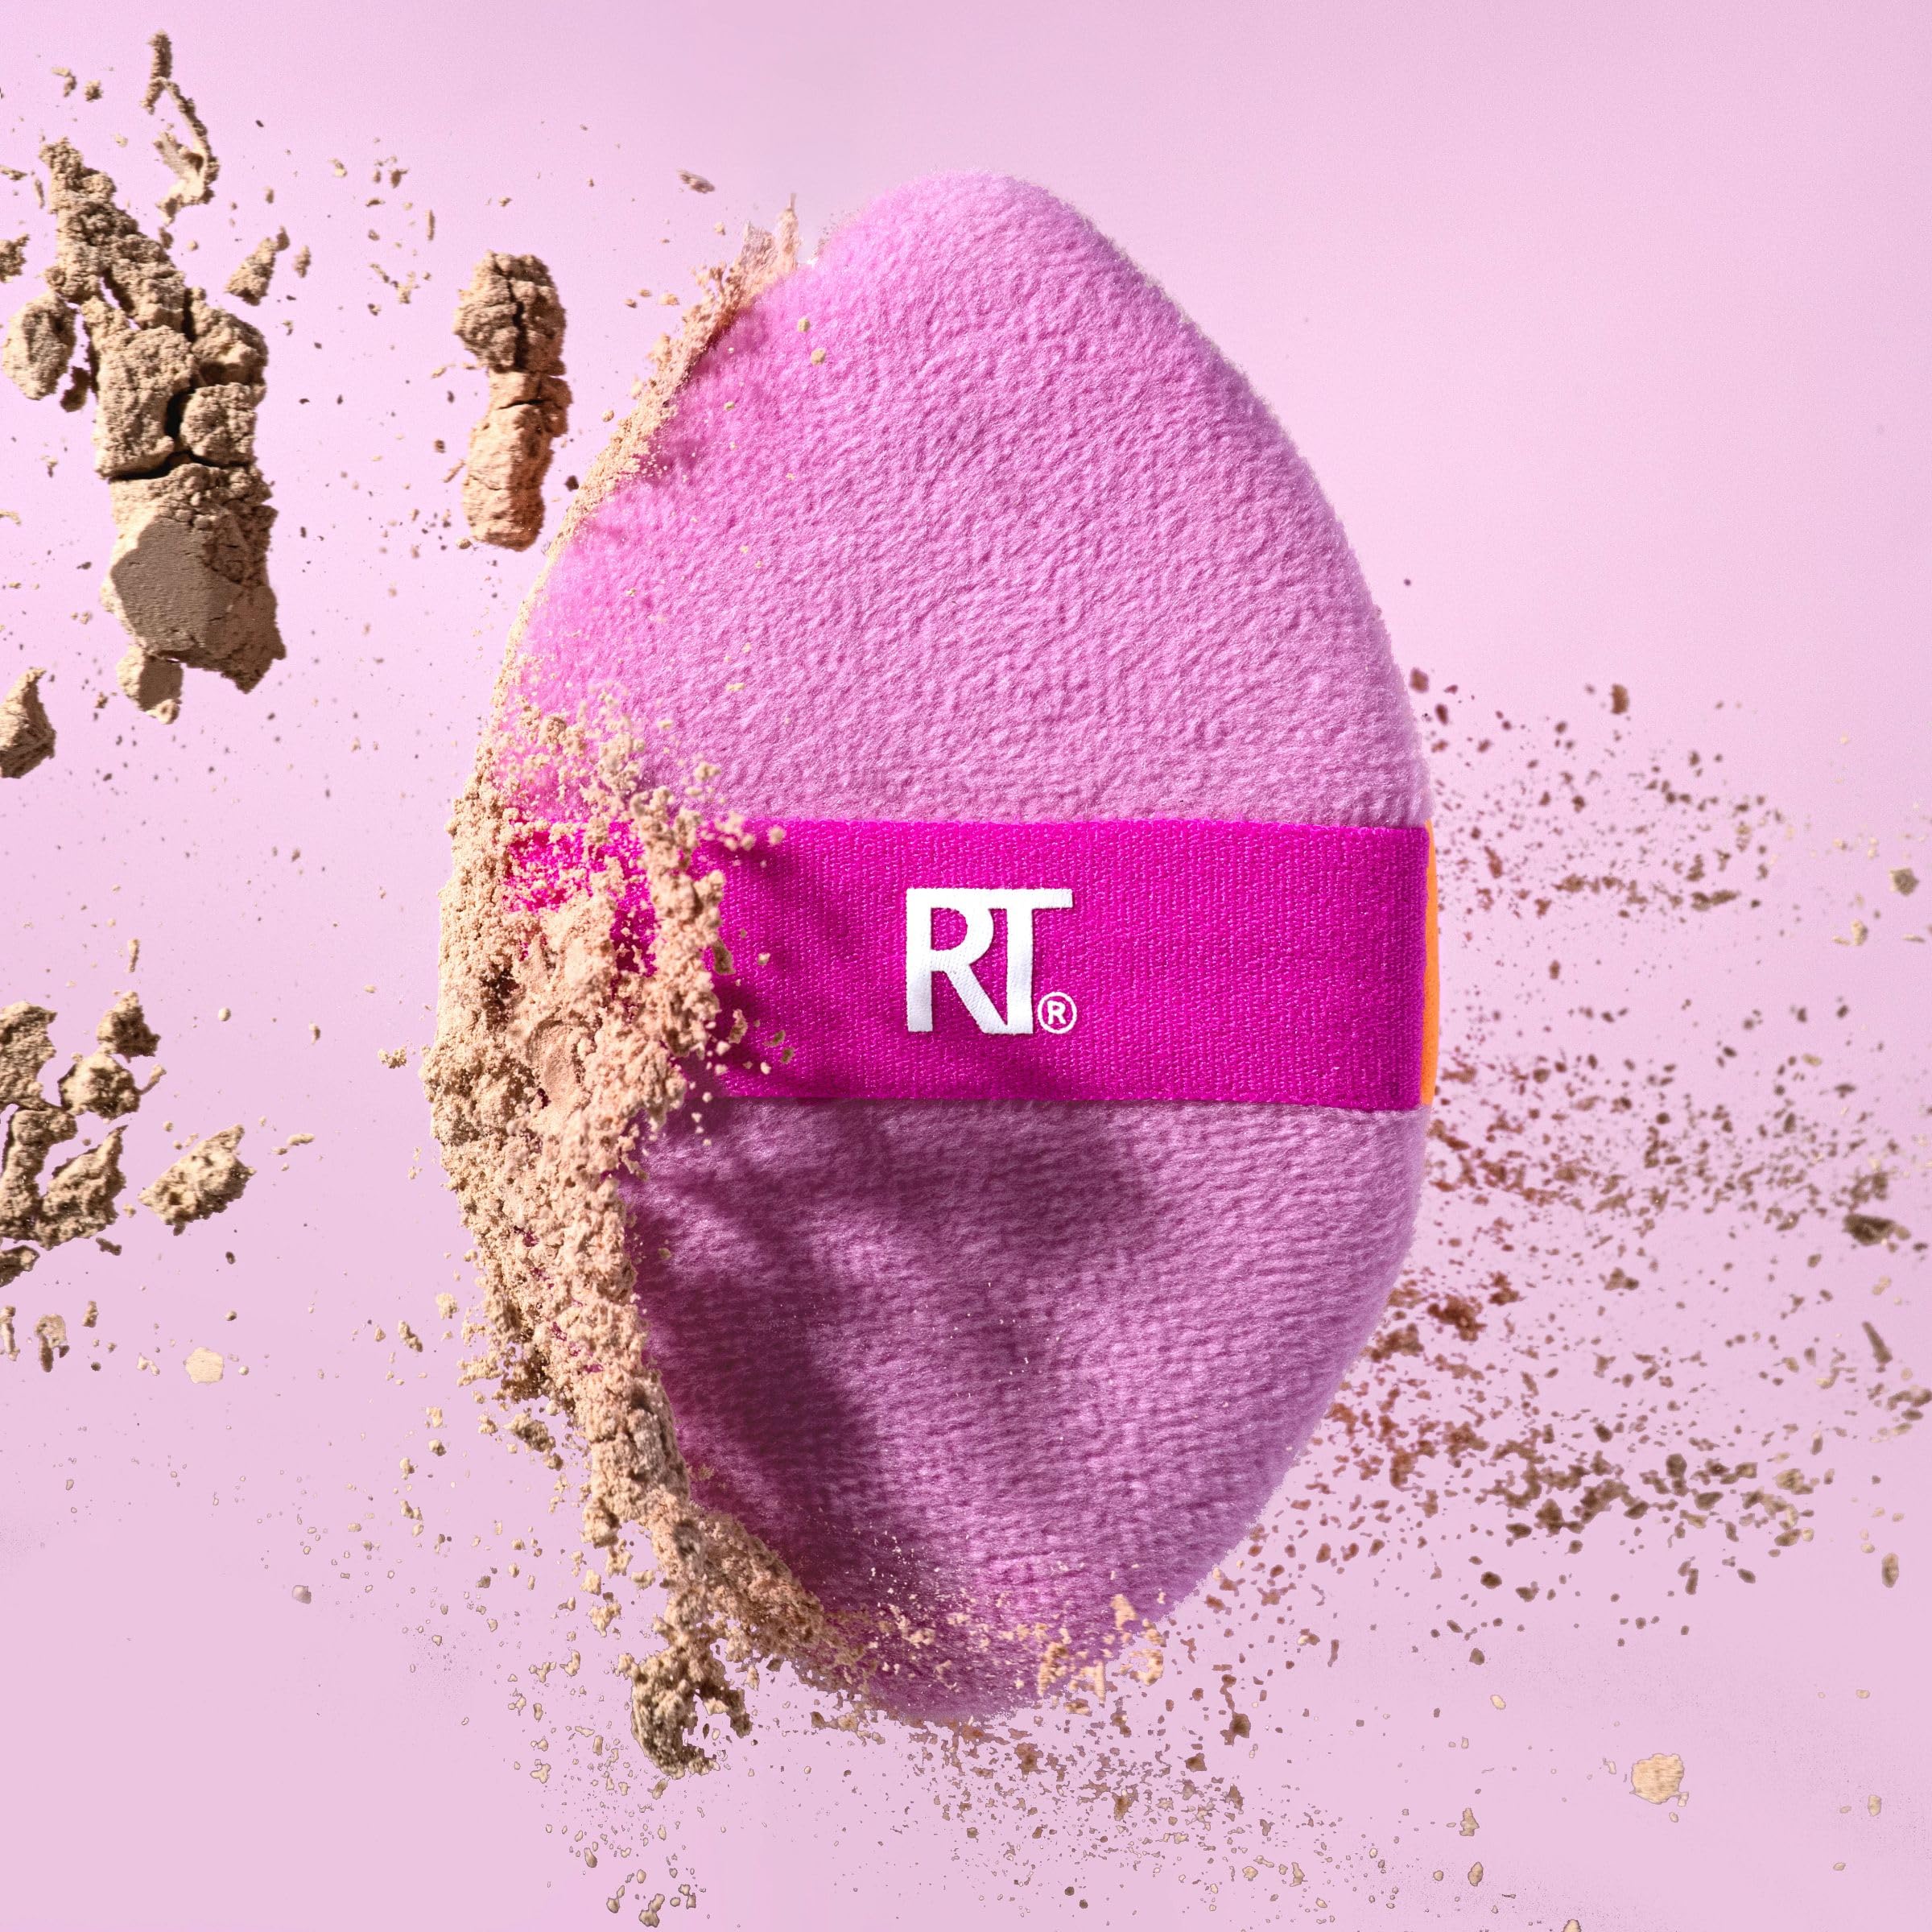 Real Techniques Miracle 2-In-1 Powder Puff, Dual-Sided, Full-Size Makeup Blending Puff, Reversible Elastic Band, Precision Tip Makeup Sponge & Powder Puff, For Liquid, Cream & Powder, 2 Count